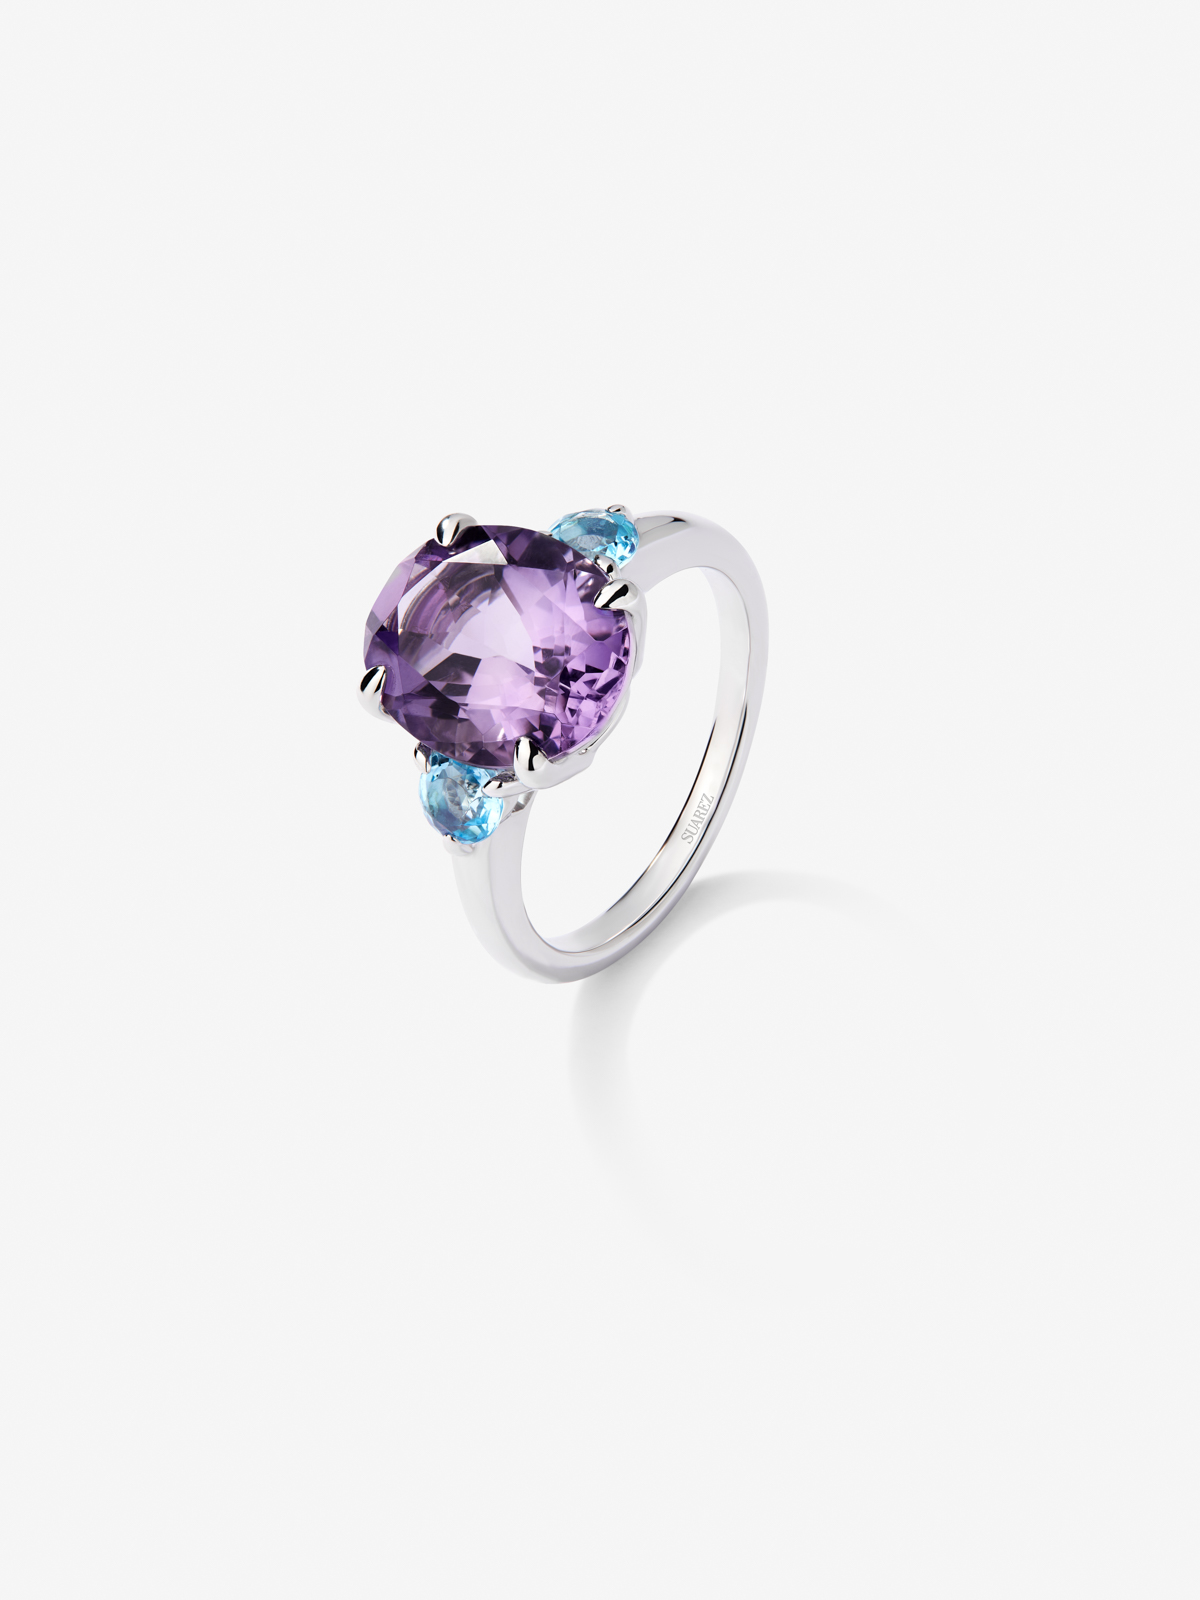 925 Silver Tieinillo Ring with Purple Ameatist in Oval Size 4.35 CTS and Blue Swiss Topacios in Bright Size of 0.54 CTS